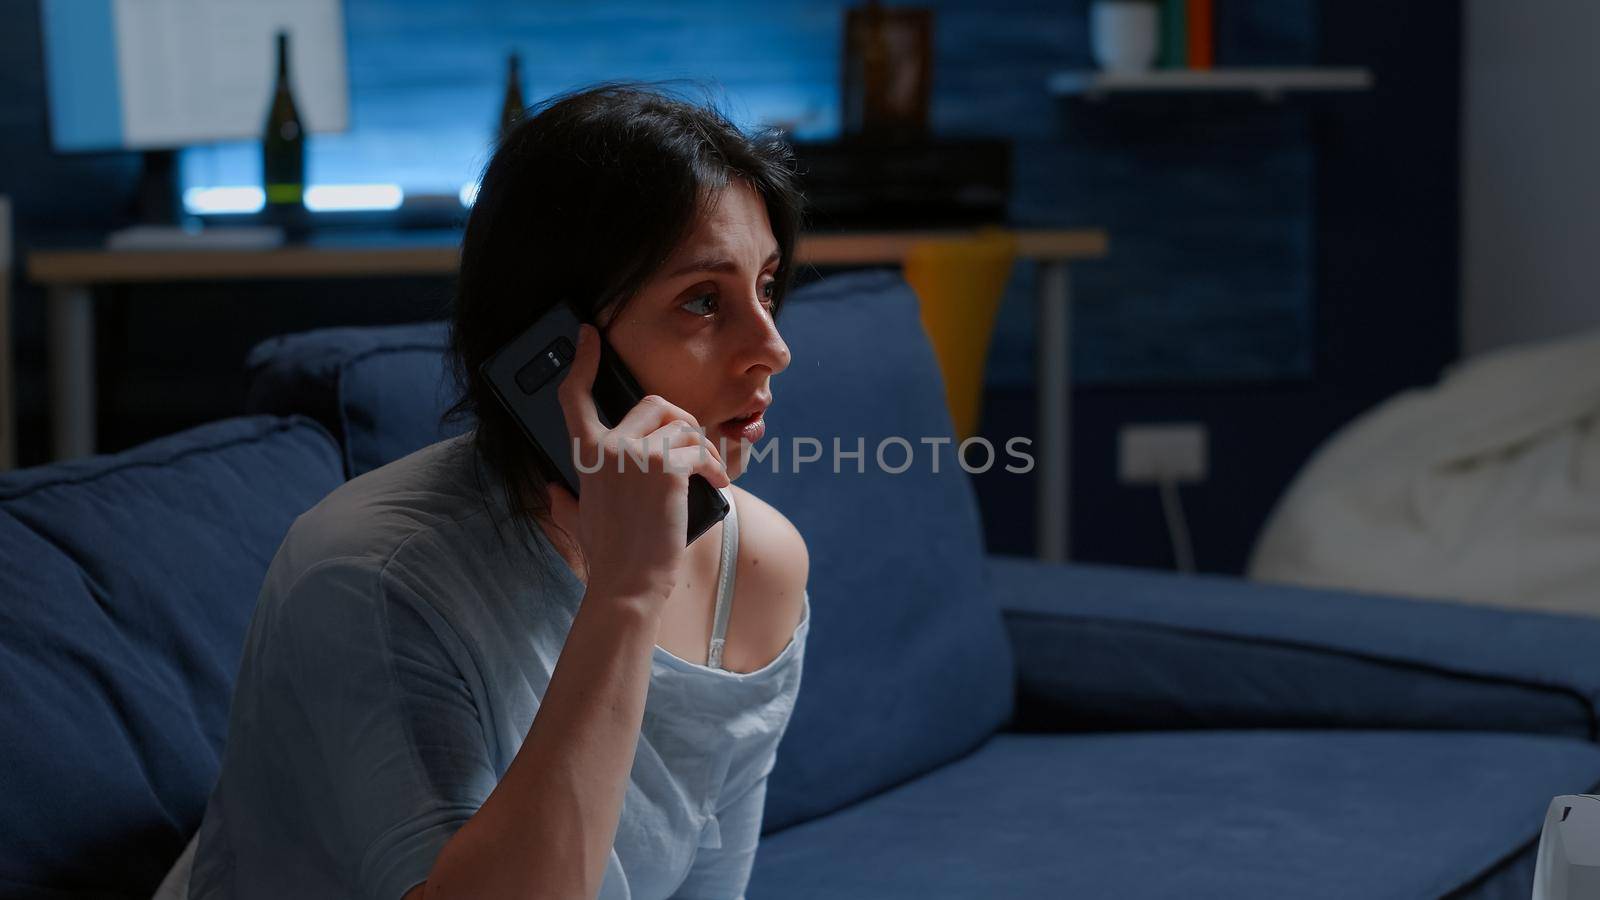 Shocked alone woman listening phone call, receving tragic news dropping smartphone feeling emotionally unstable, scared, lonely desperate, vulnerable. Traumatised person suffering from chronic disease